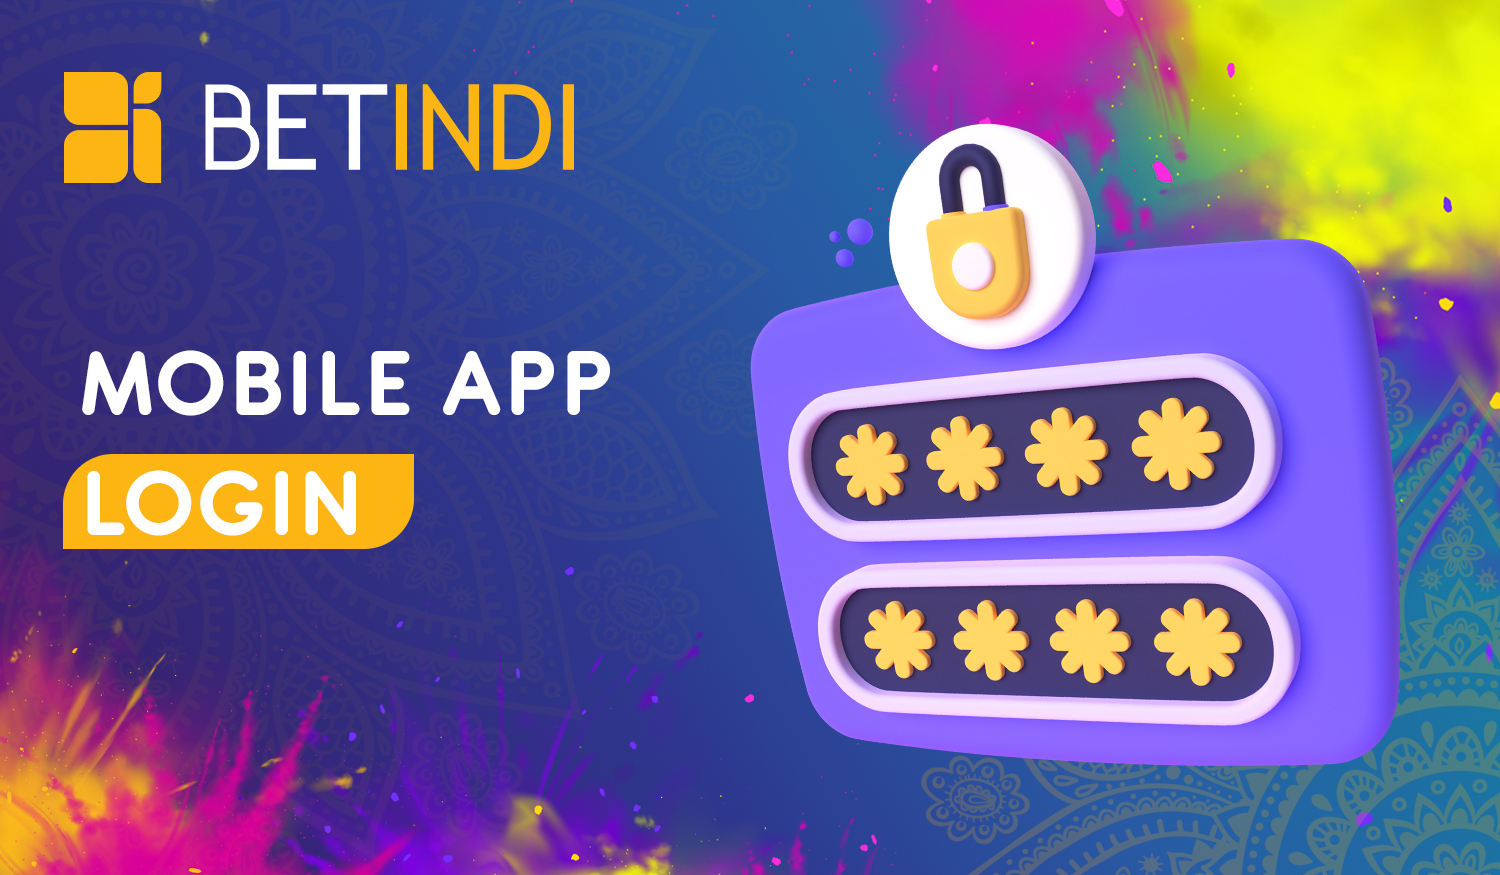 How to log in to your account in the Betindi app 